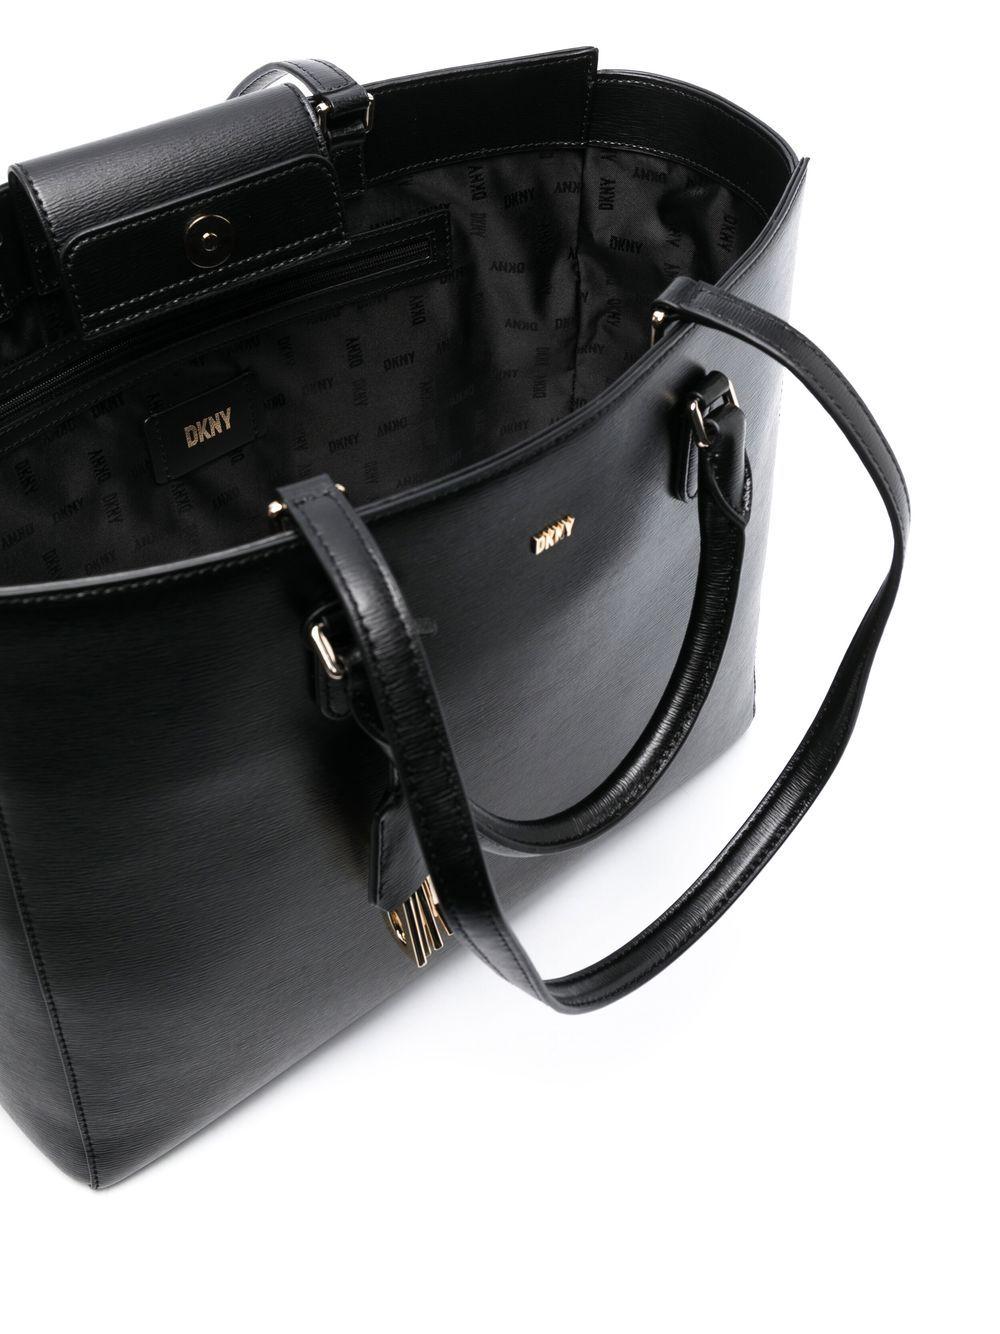 DKNY Paige Book Tote Bag in Black | Lyst